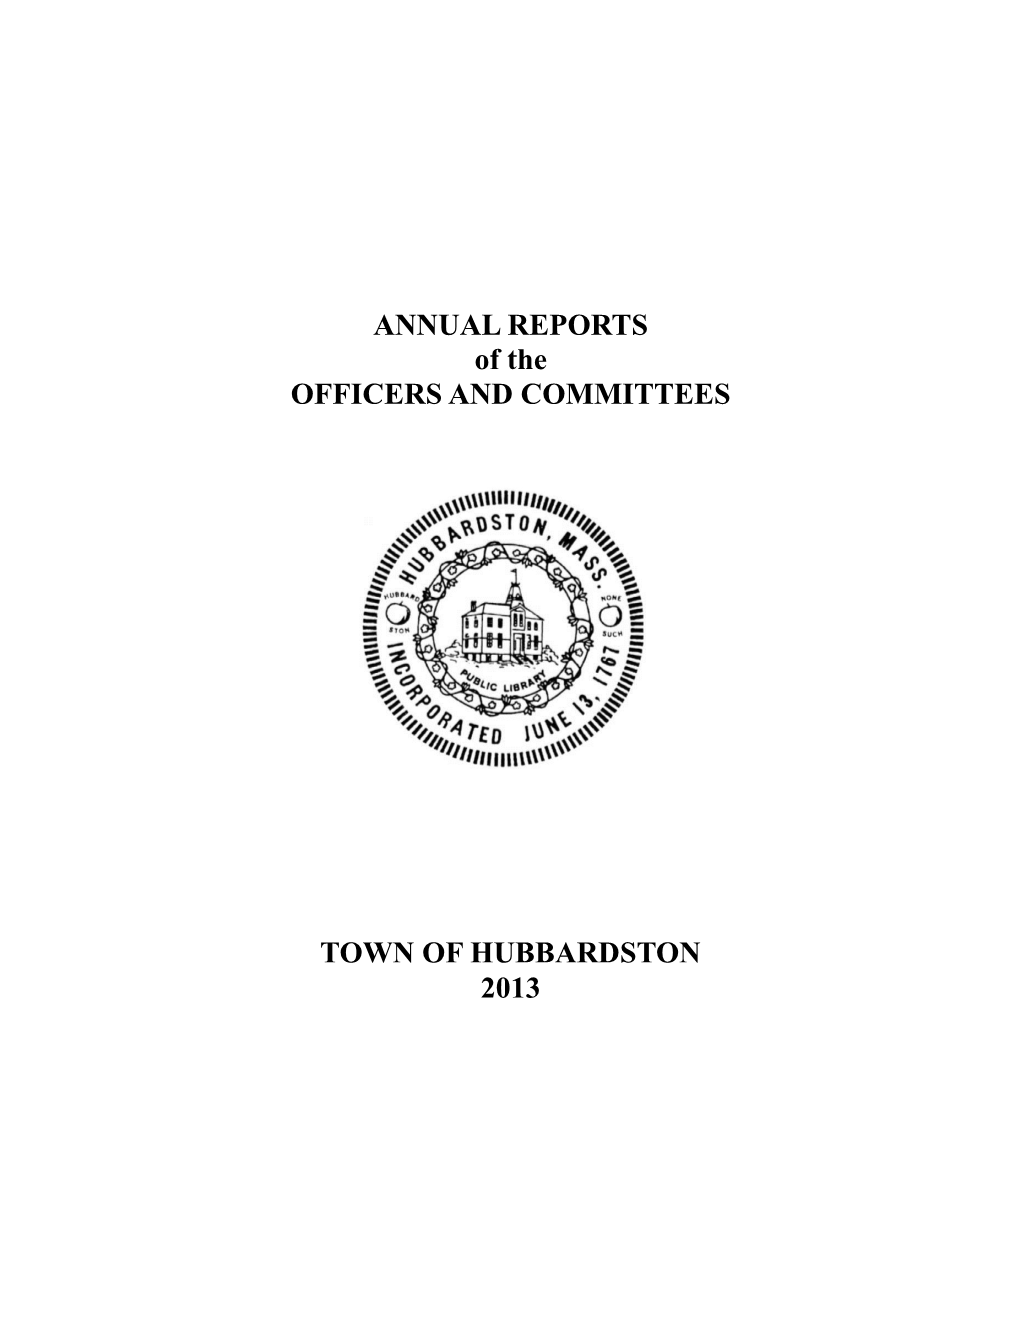 ANNUAL REPORTS of the OFFICERS and COMMITTEES TOWN OF